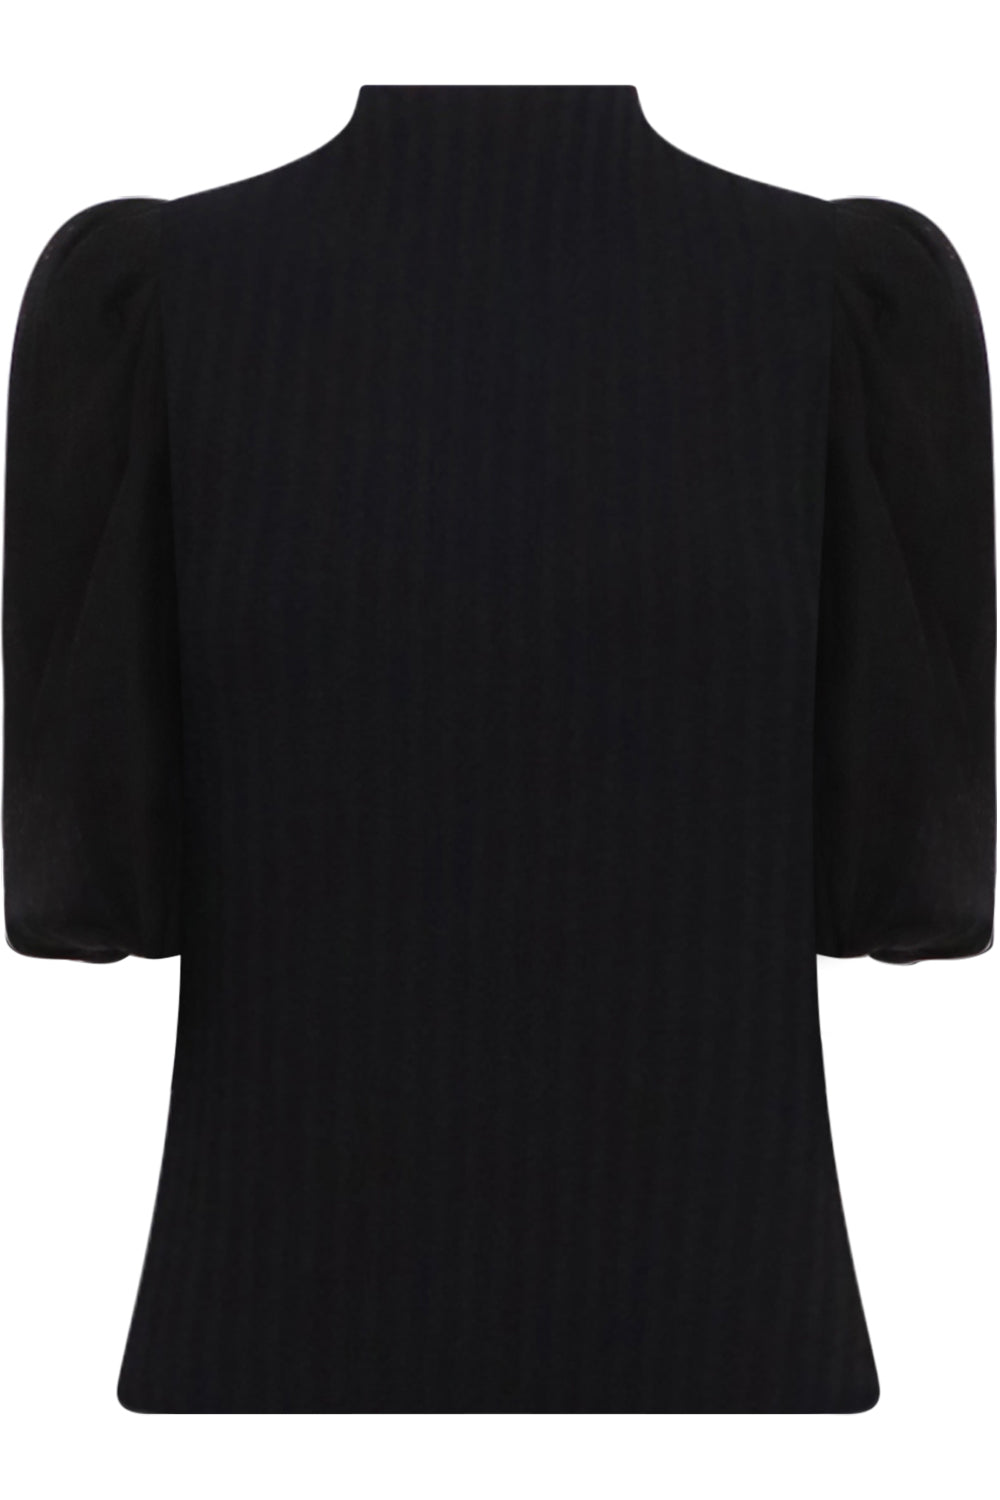 MOTHER OF PEARL RTW SOPHIE TOP WITH SHEER SLEEVE | BLACK